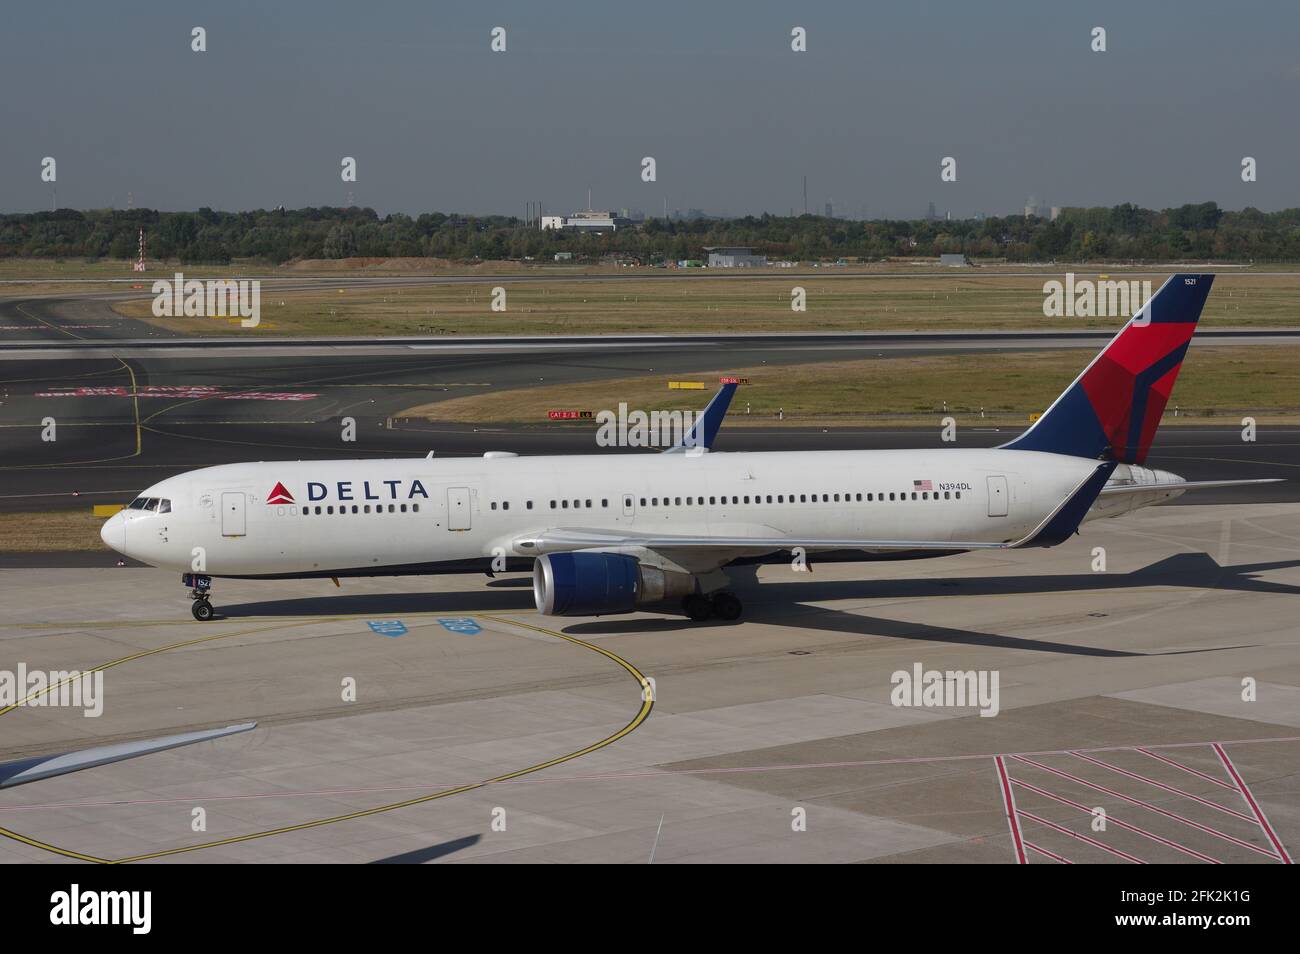 Düsseldorf, Germany - September 27, 2016: Boeing 767-300 of Delta Air Lines taxiing at the airport of Dusseldorf Stock Photo